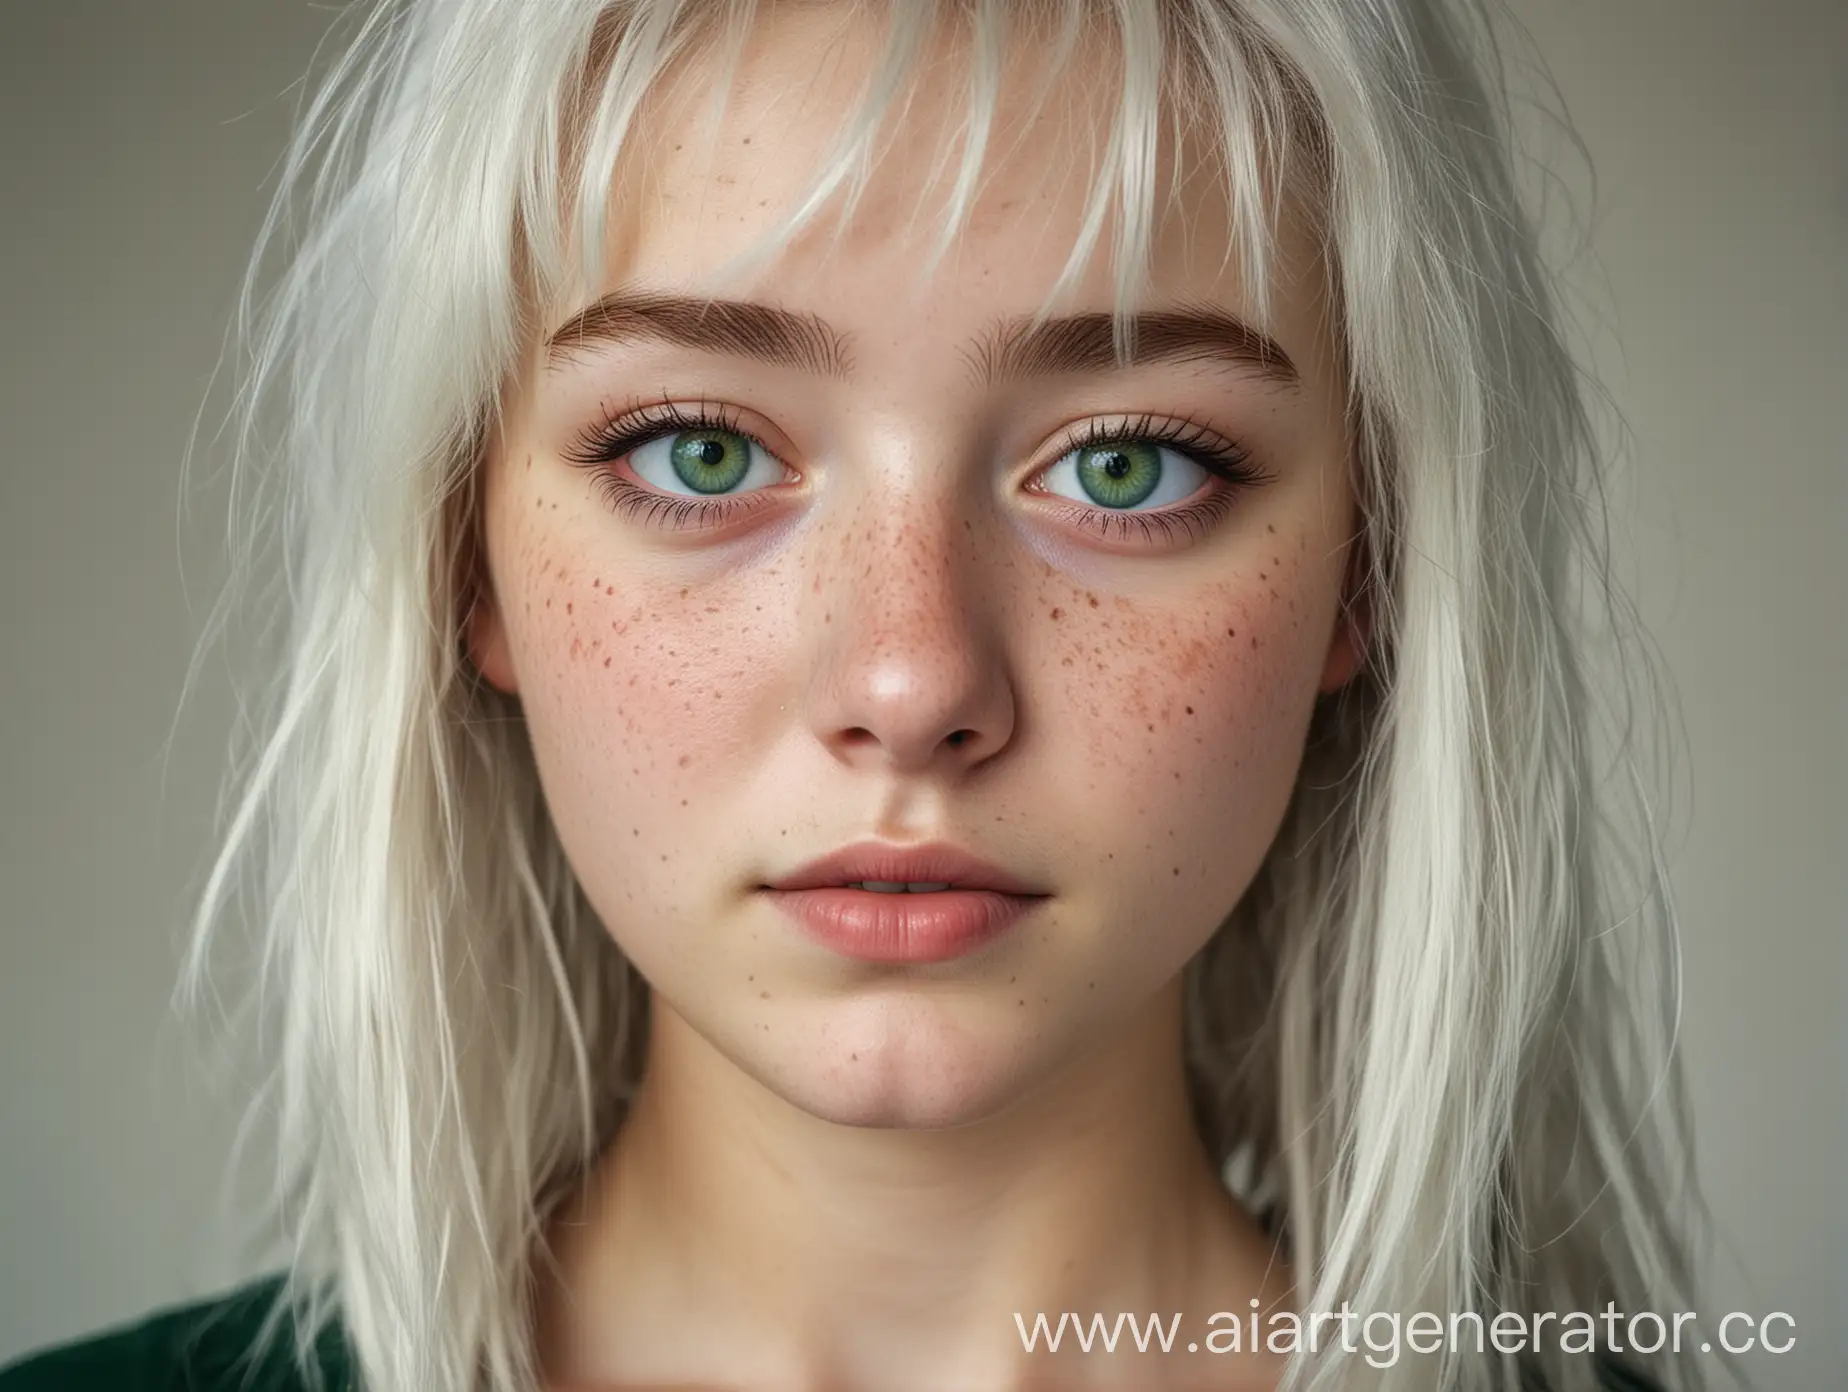 Teenage-Girl-Portrait-with-White-Hair-Freckles-and-Green-Eyes